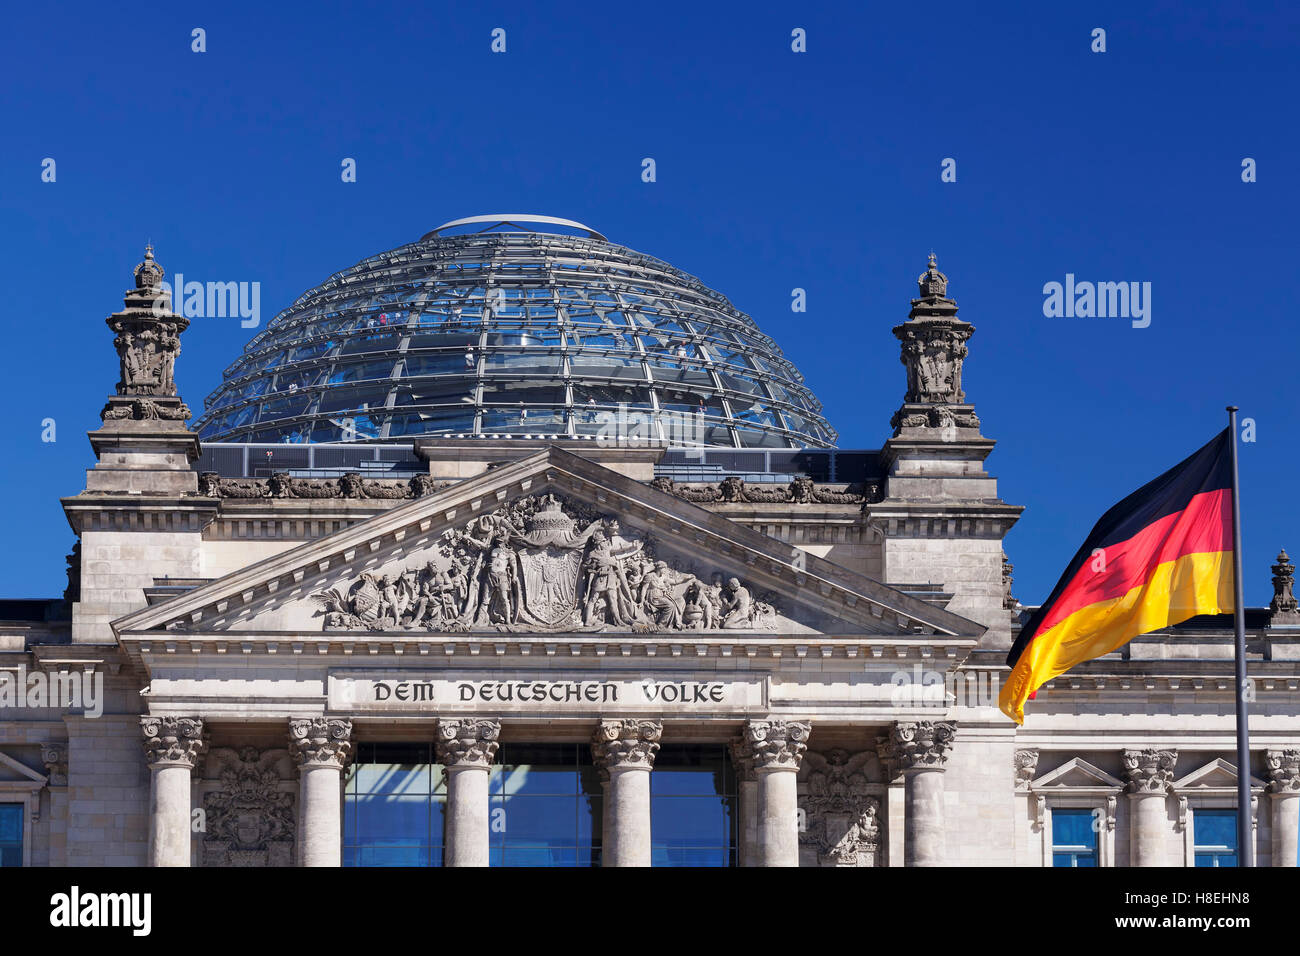 Reichstag Parliament Building, The Dome by Norman Foster architect, Mitte, Berlin, Germany, Europe Stock Photo